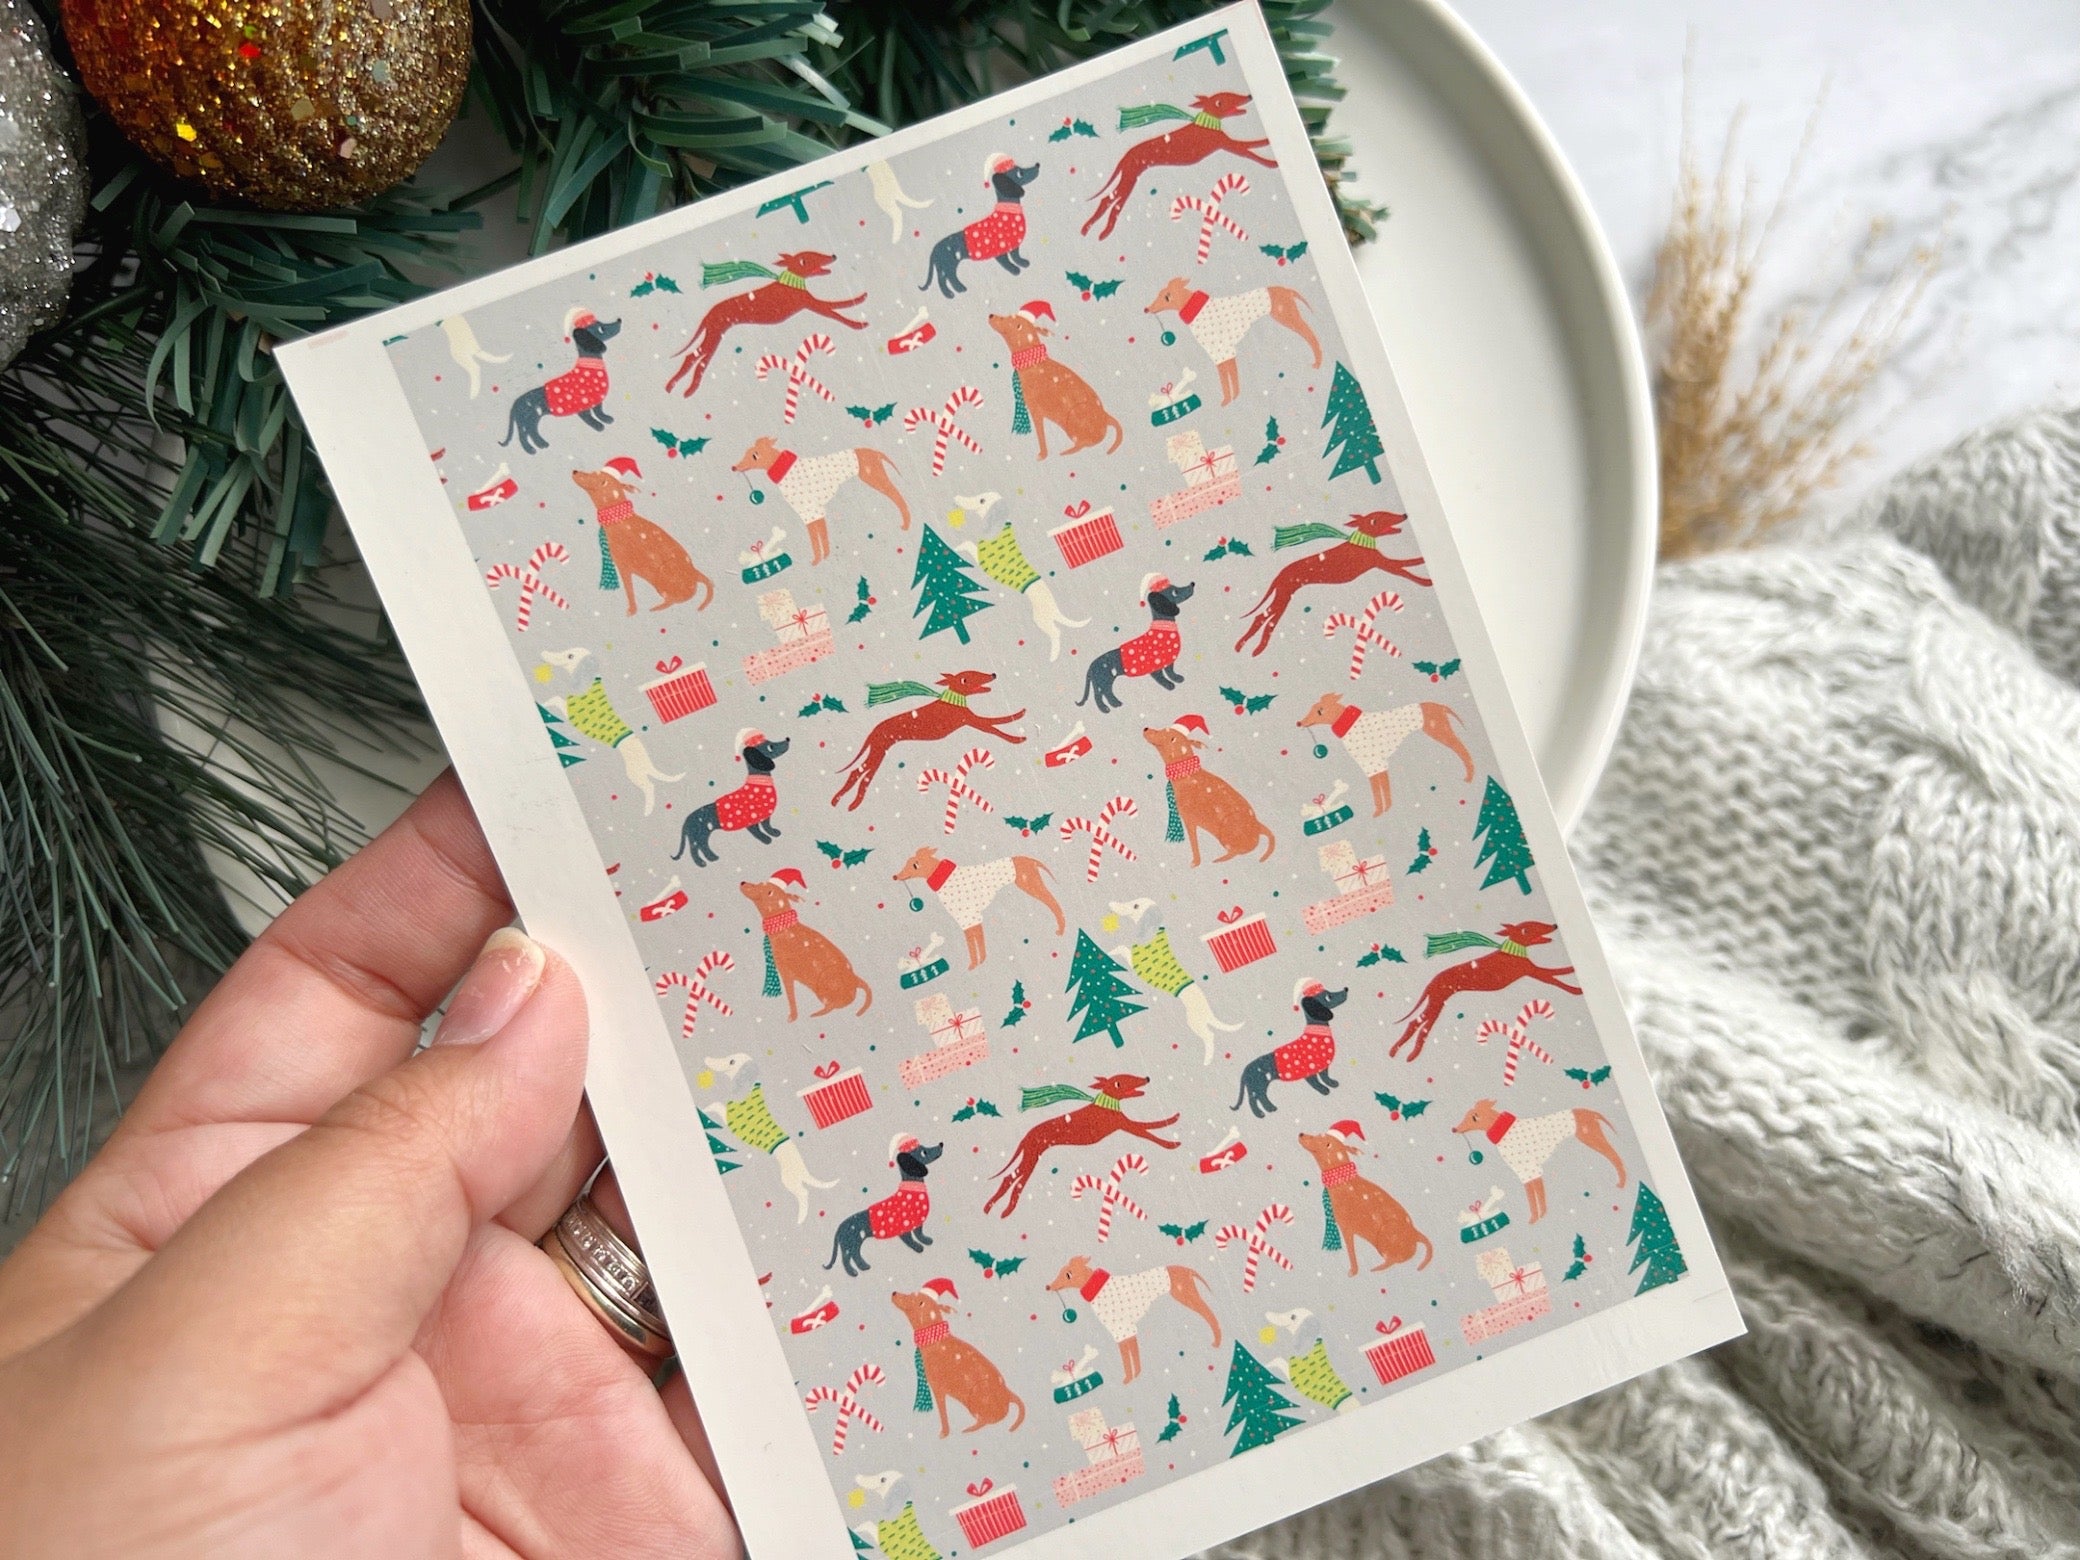 1 Sheet, Approx 13x90cm, Christmas Print Water Decal Image Transfer for Polymer Clay / Ceramics